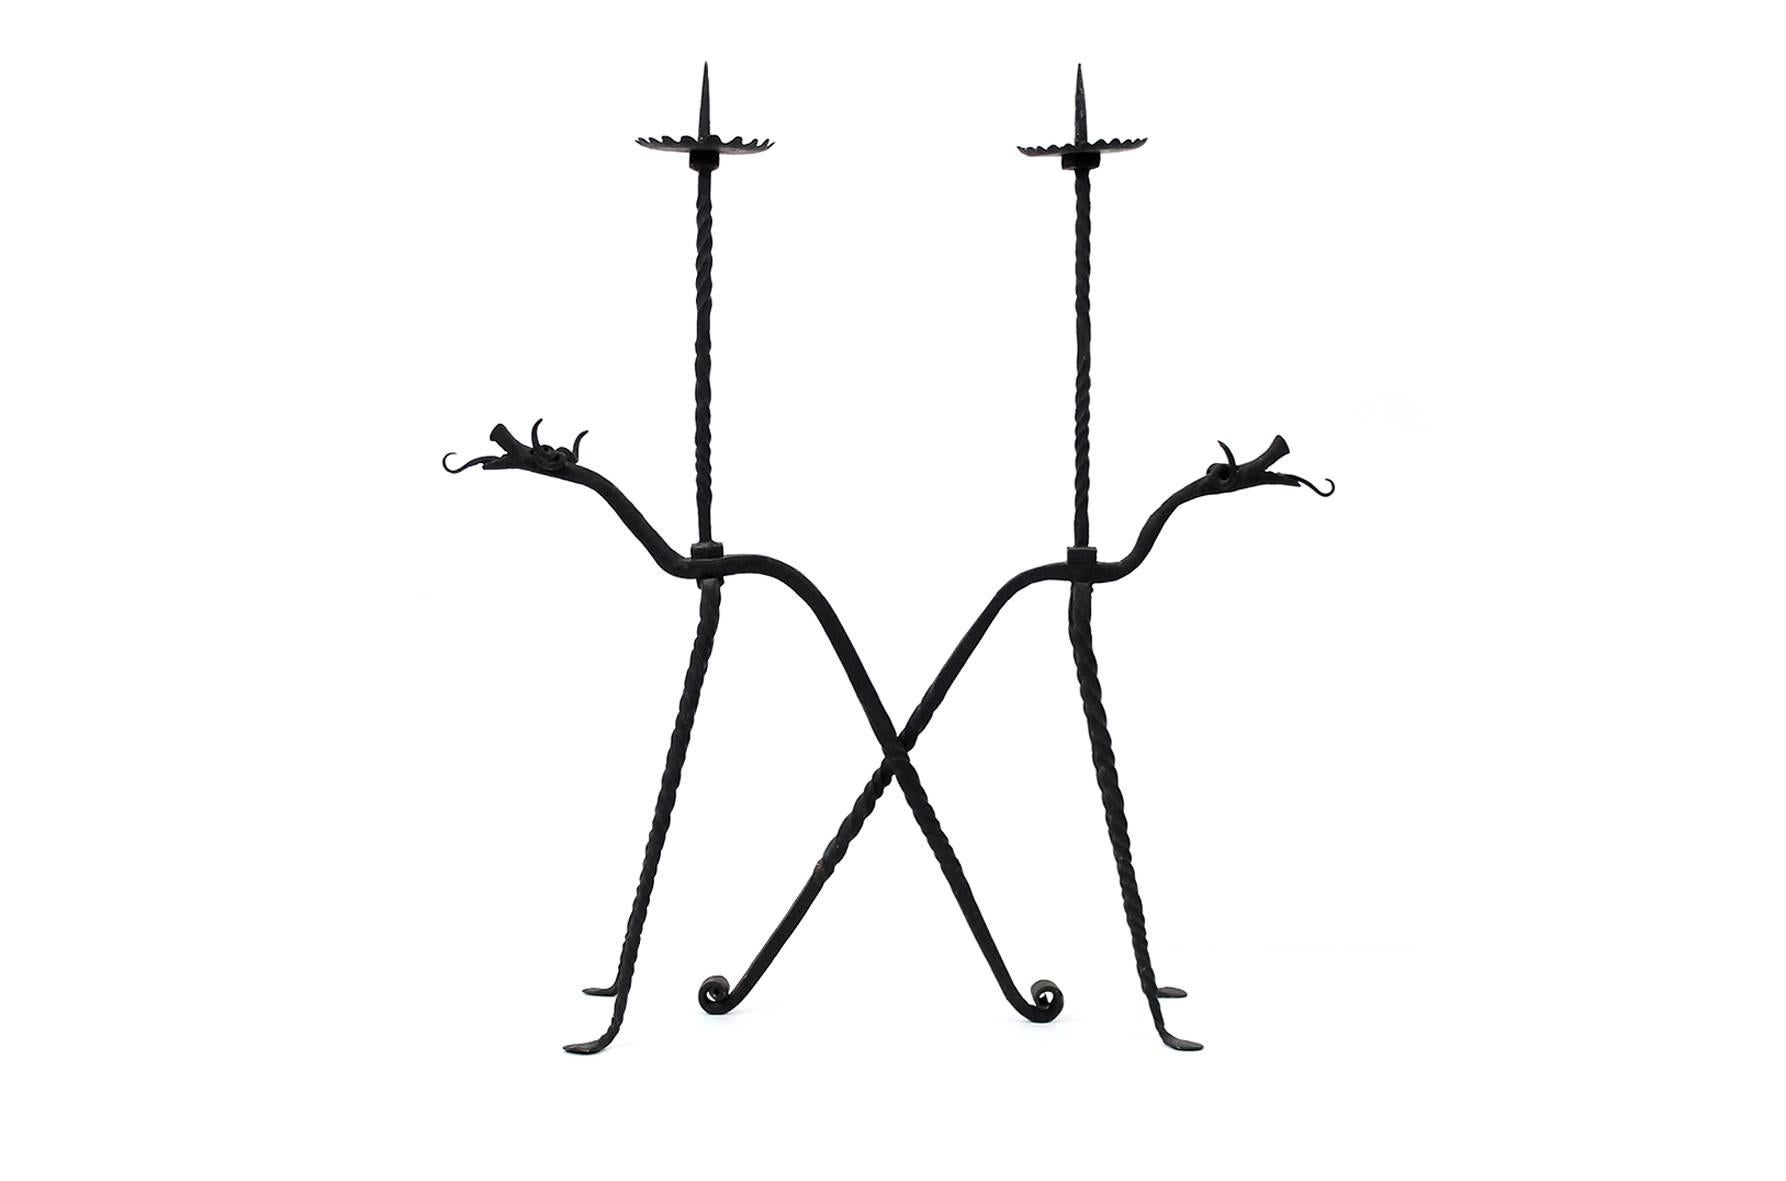 Aesthetic Movement Pair of Iron Candlesticks Attributed to Samuel Yellin